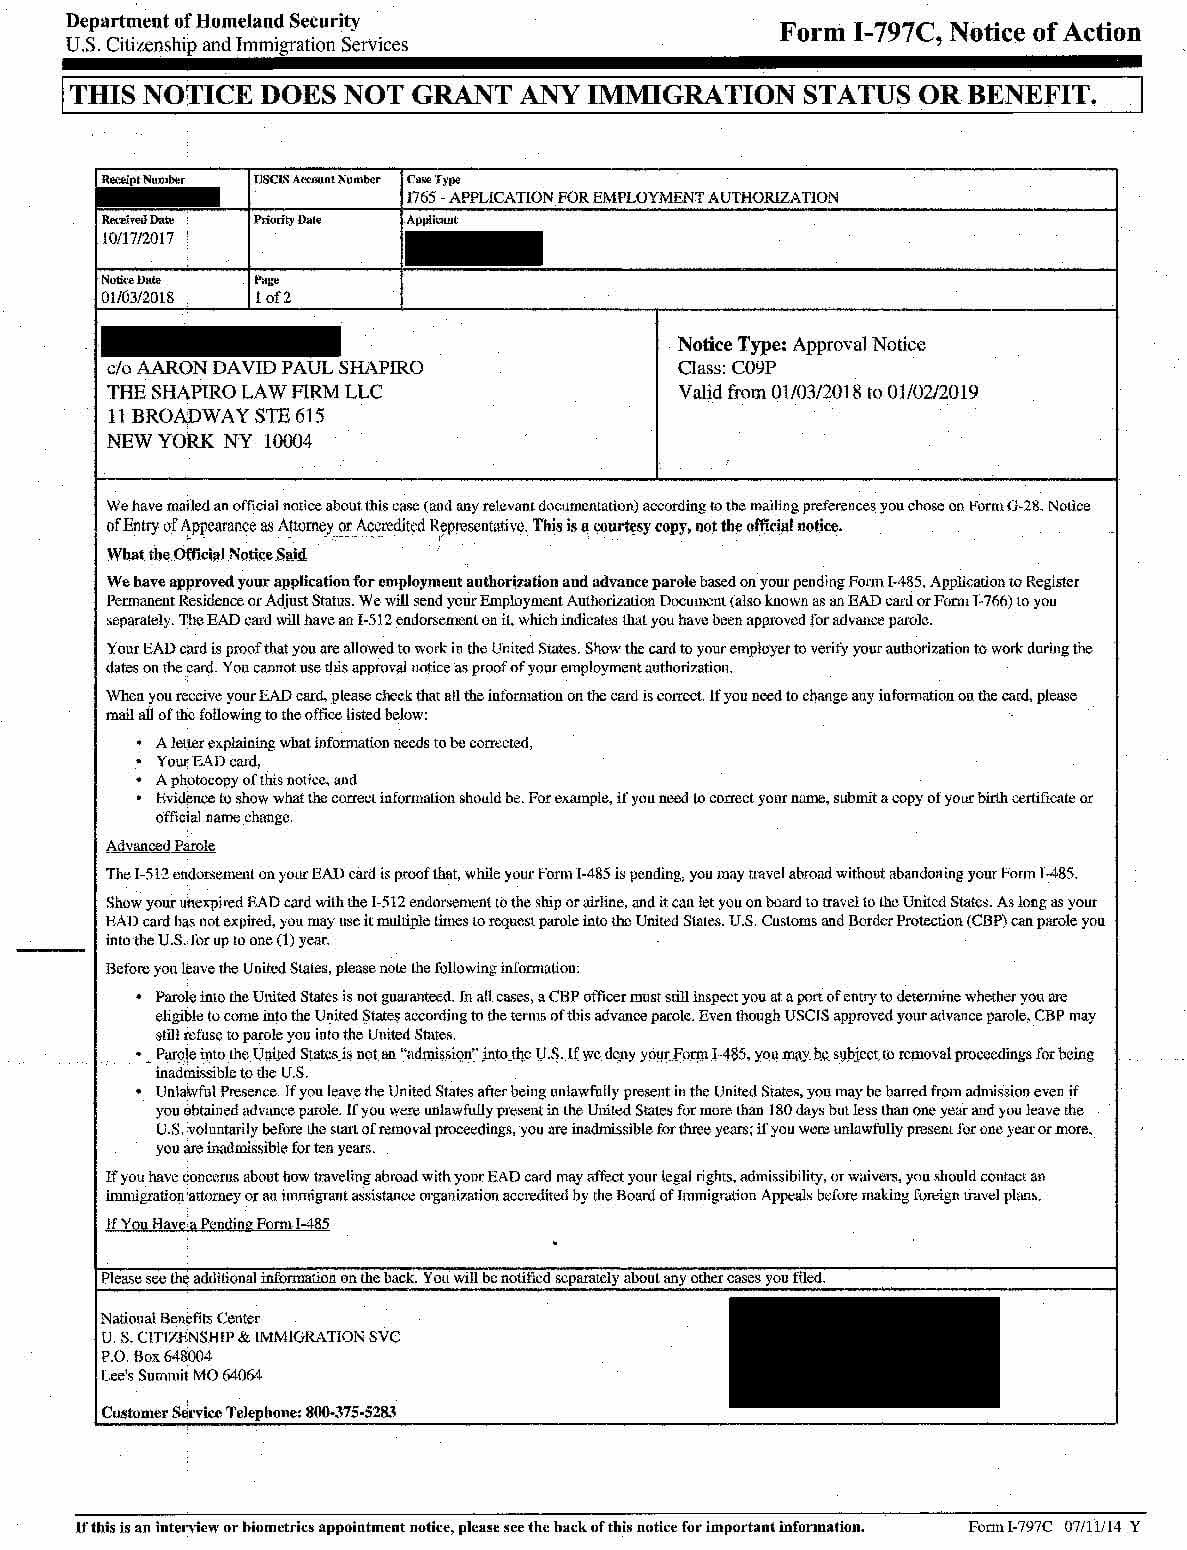 I-797C, Notice of Action - I-765 Approval Notice (c)((9)